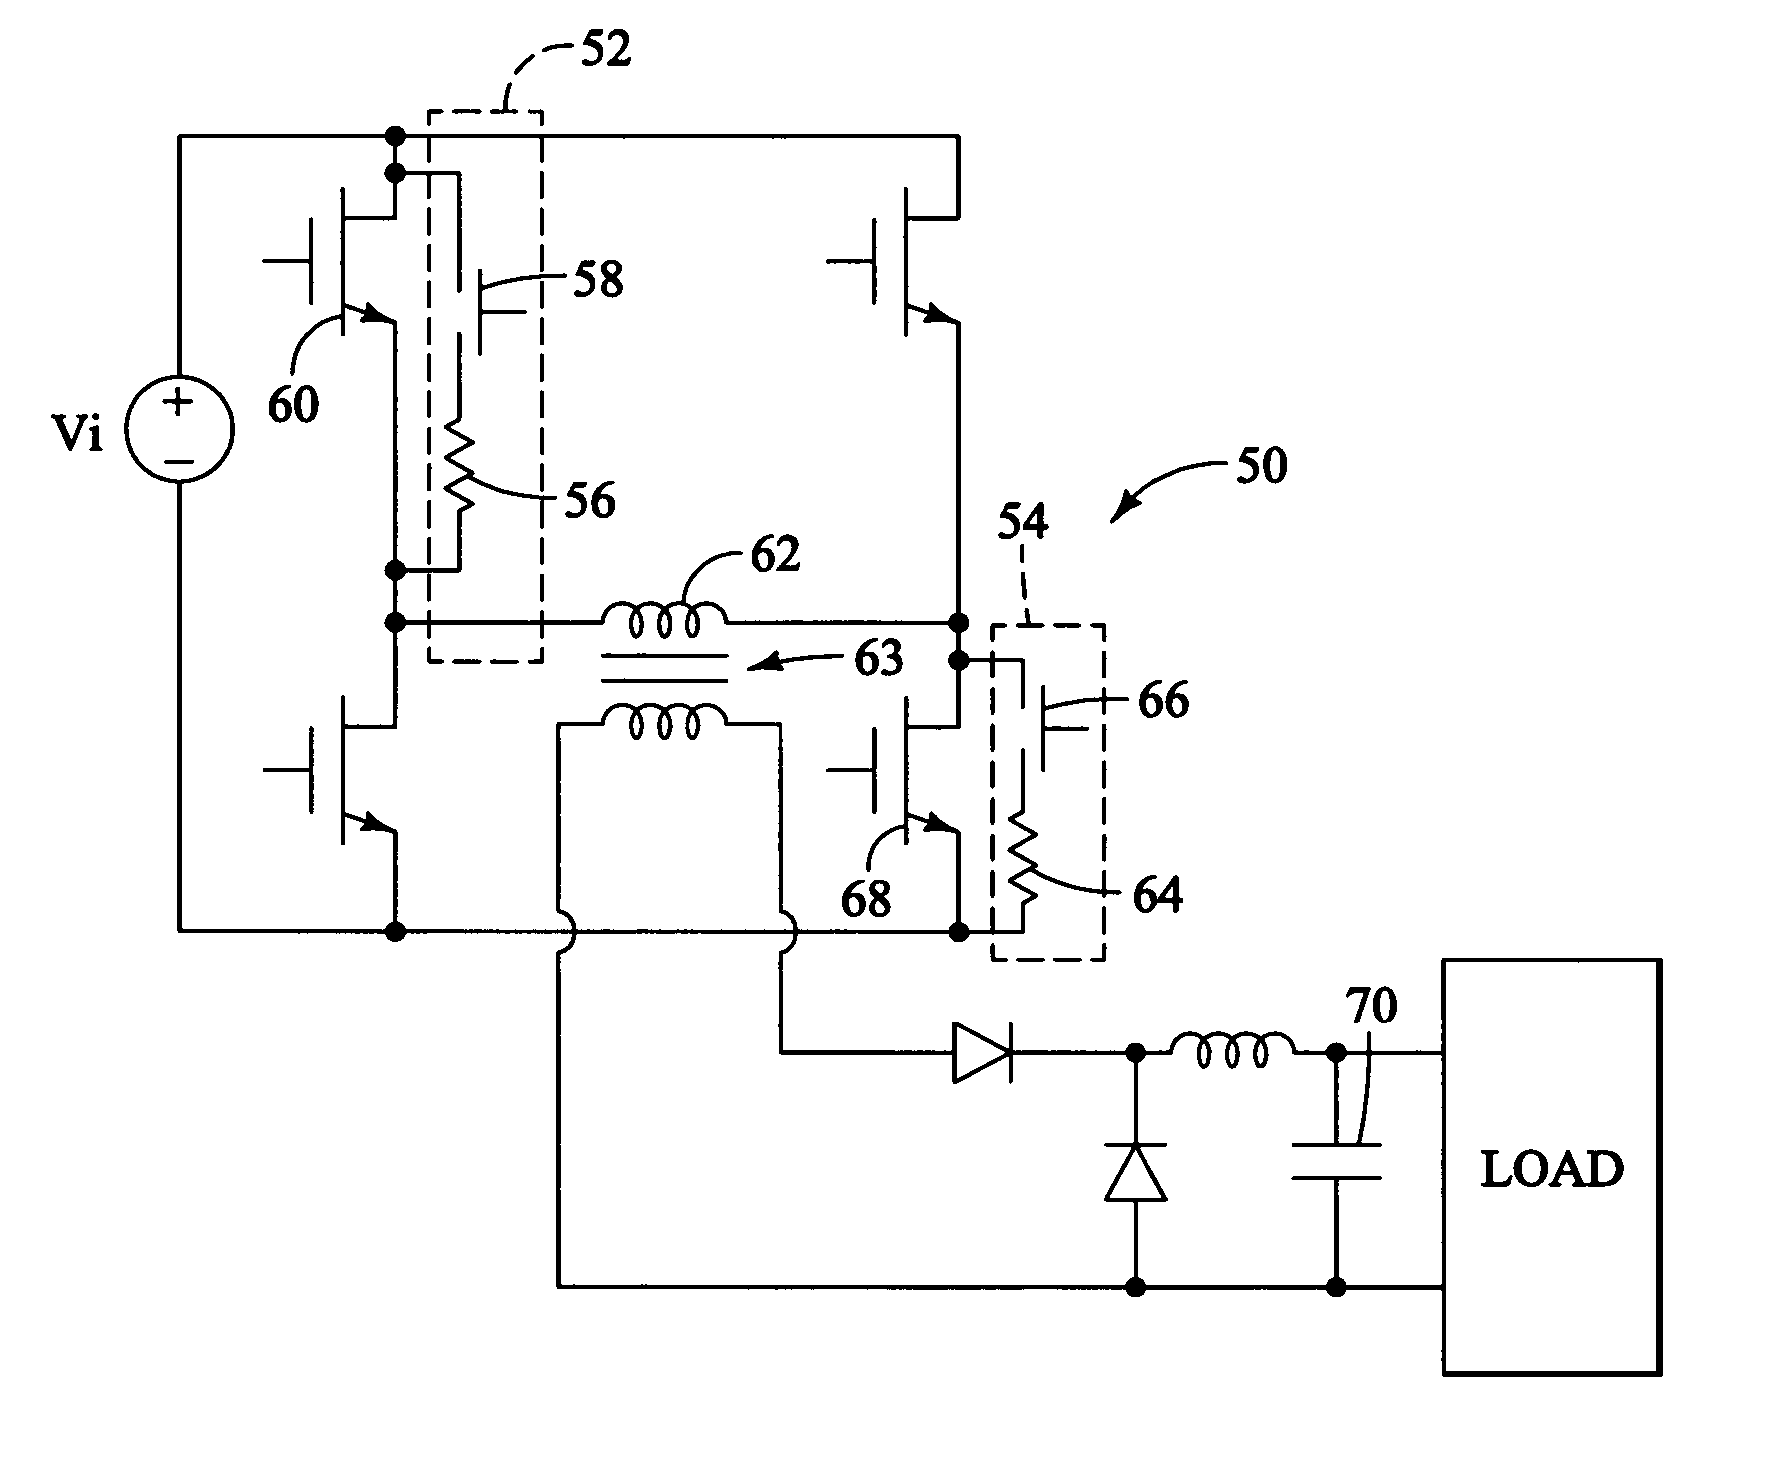 Method and apparatus for starting power converters